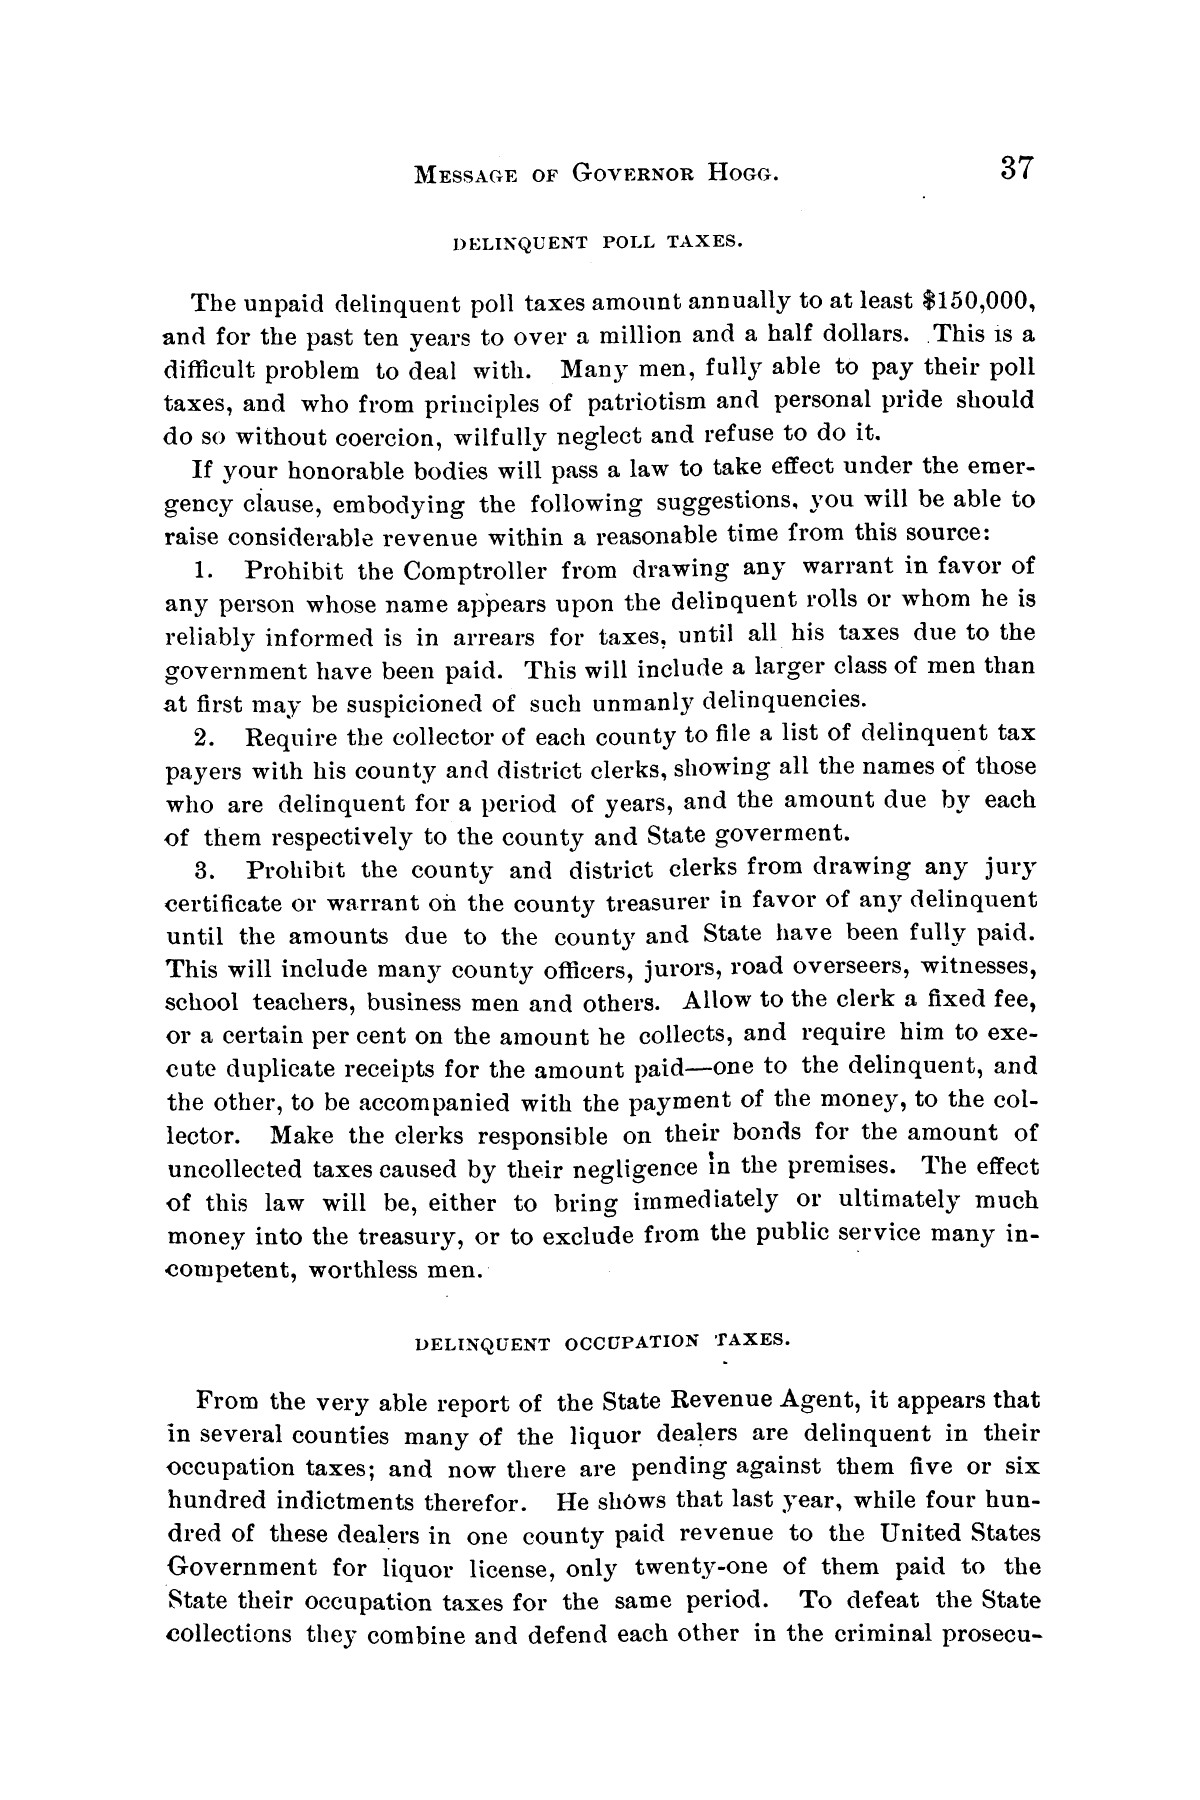 Message of Governor James S. Hogg to the twenty-fourth legislature of Texas
                                                
                                                    [Sequence #]: 37 of 48
                                                